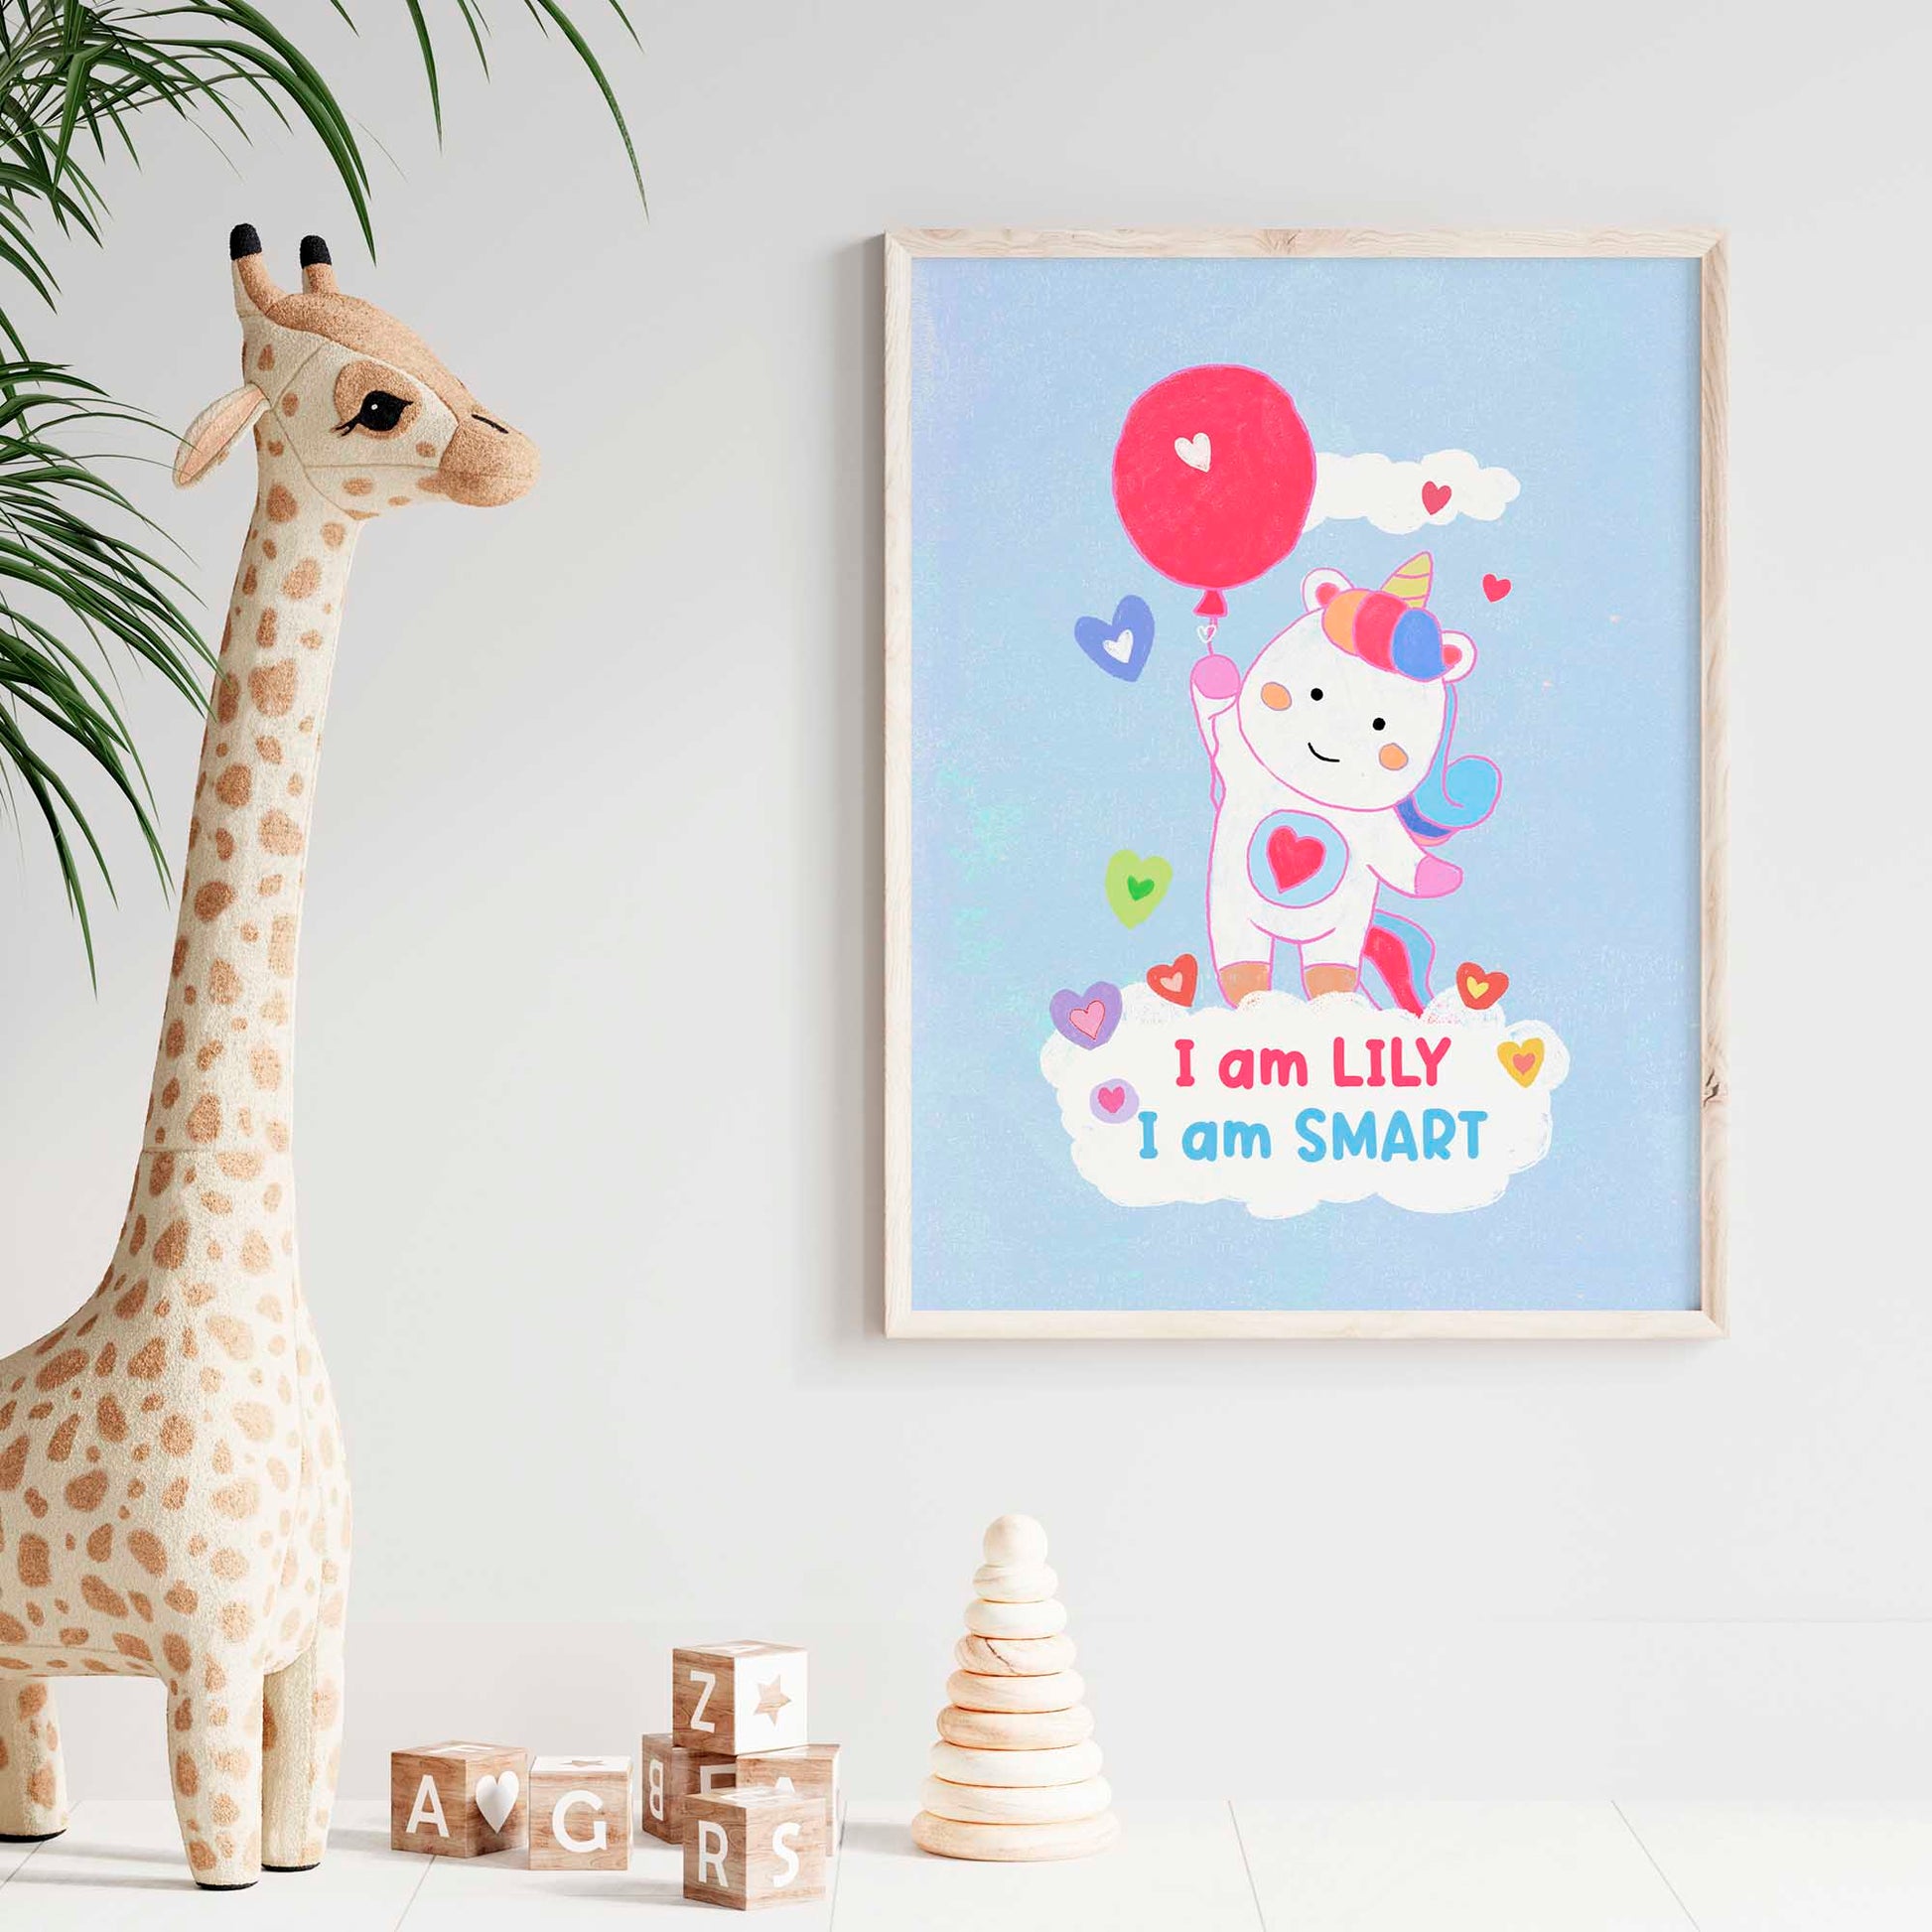 Sparkling unicorn poster with empowering affirmations, a charming touch for a girl's room.